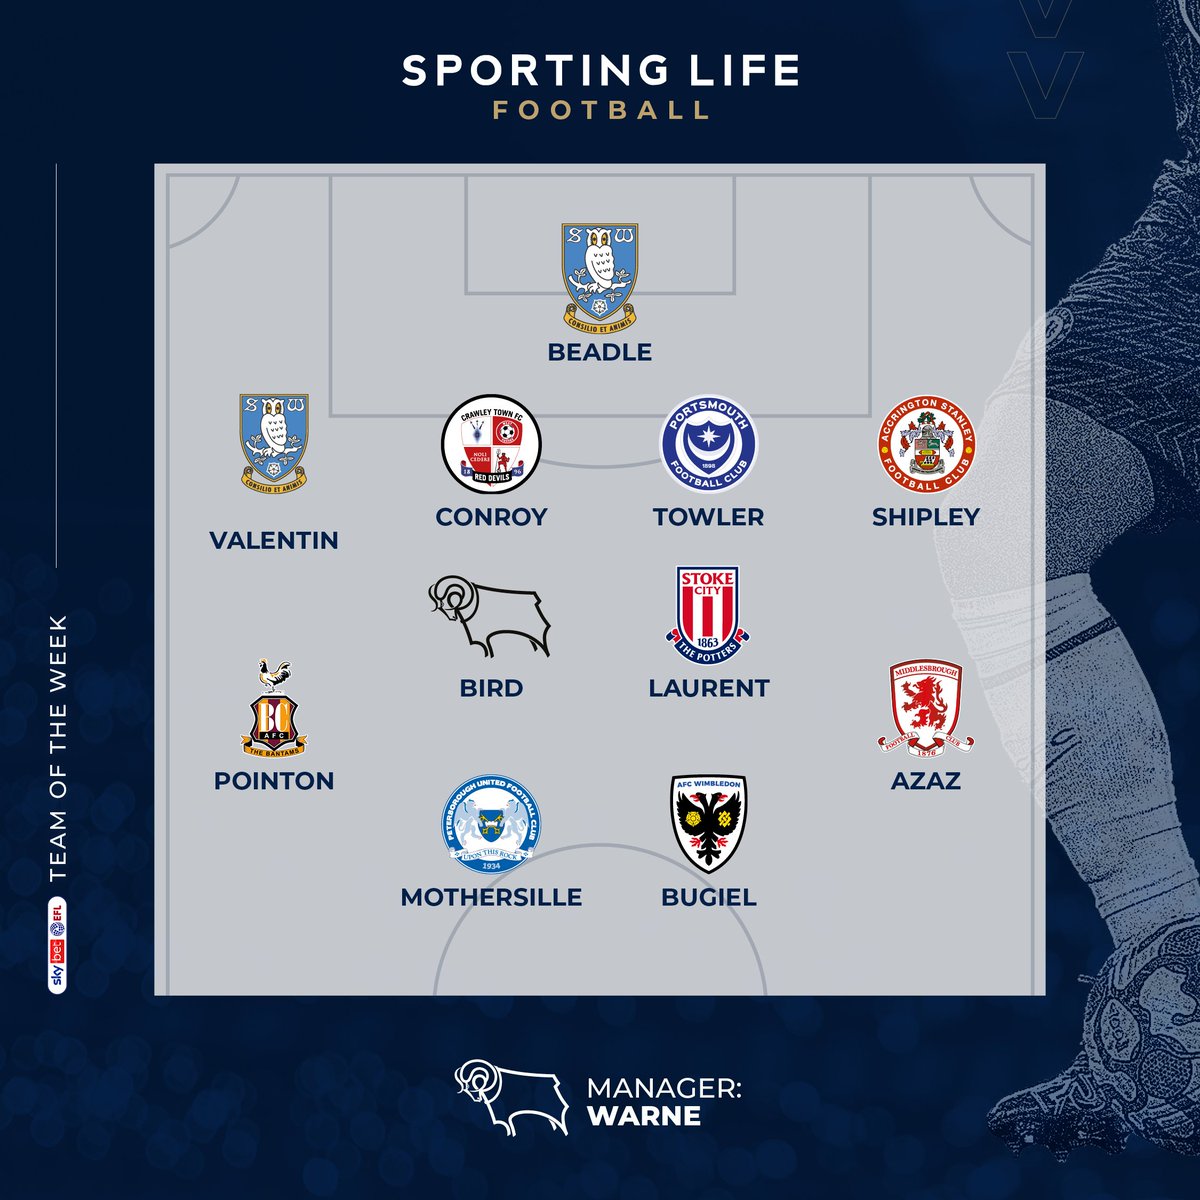 After the penultimate weekend in the Championship, and the final day in League One & League Two, I give you my last full #EFL TOTW of 23/24 for @SportingLifeFC ⭐️

James Beadle 🔥

#SWFC | #TownTeamTogether | #Pompey | #ASFC | #DCFC | #SCFC | #BCAFC | #Boro | #PUFC | #AFCW